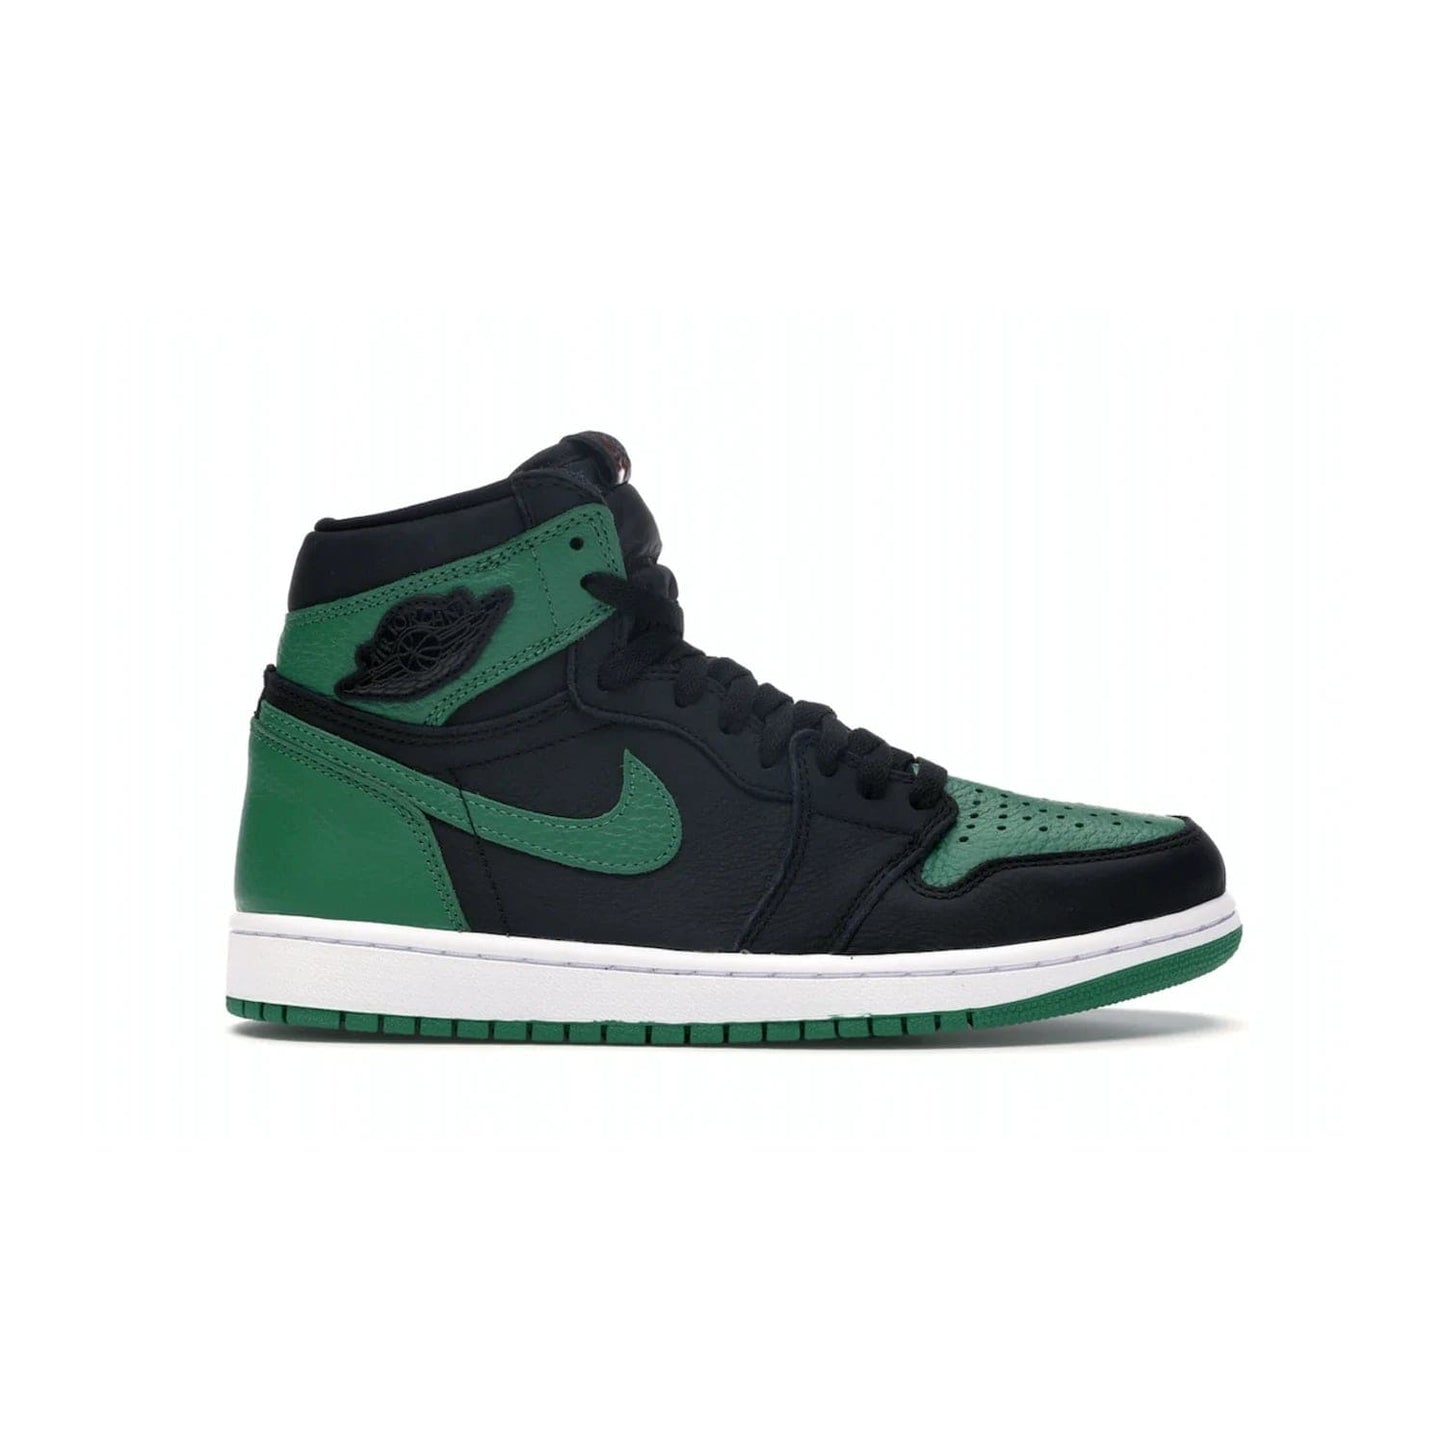 Jordan 1 Retro High Pine Green Black - Image 1 - Only at www.BallersClubKickz.com - Step into fresh style with the Jordan 1 Retro High Pine Green Black. Combining a black tumbled leather upper with green leather overlays, this sneaker features a Gym Red embroidered tongue tag, sail midsole, and pine green outsole for iconic style with a unique twist.